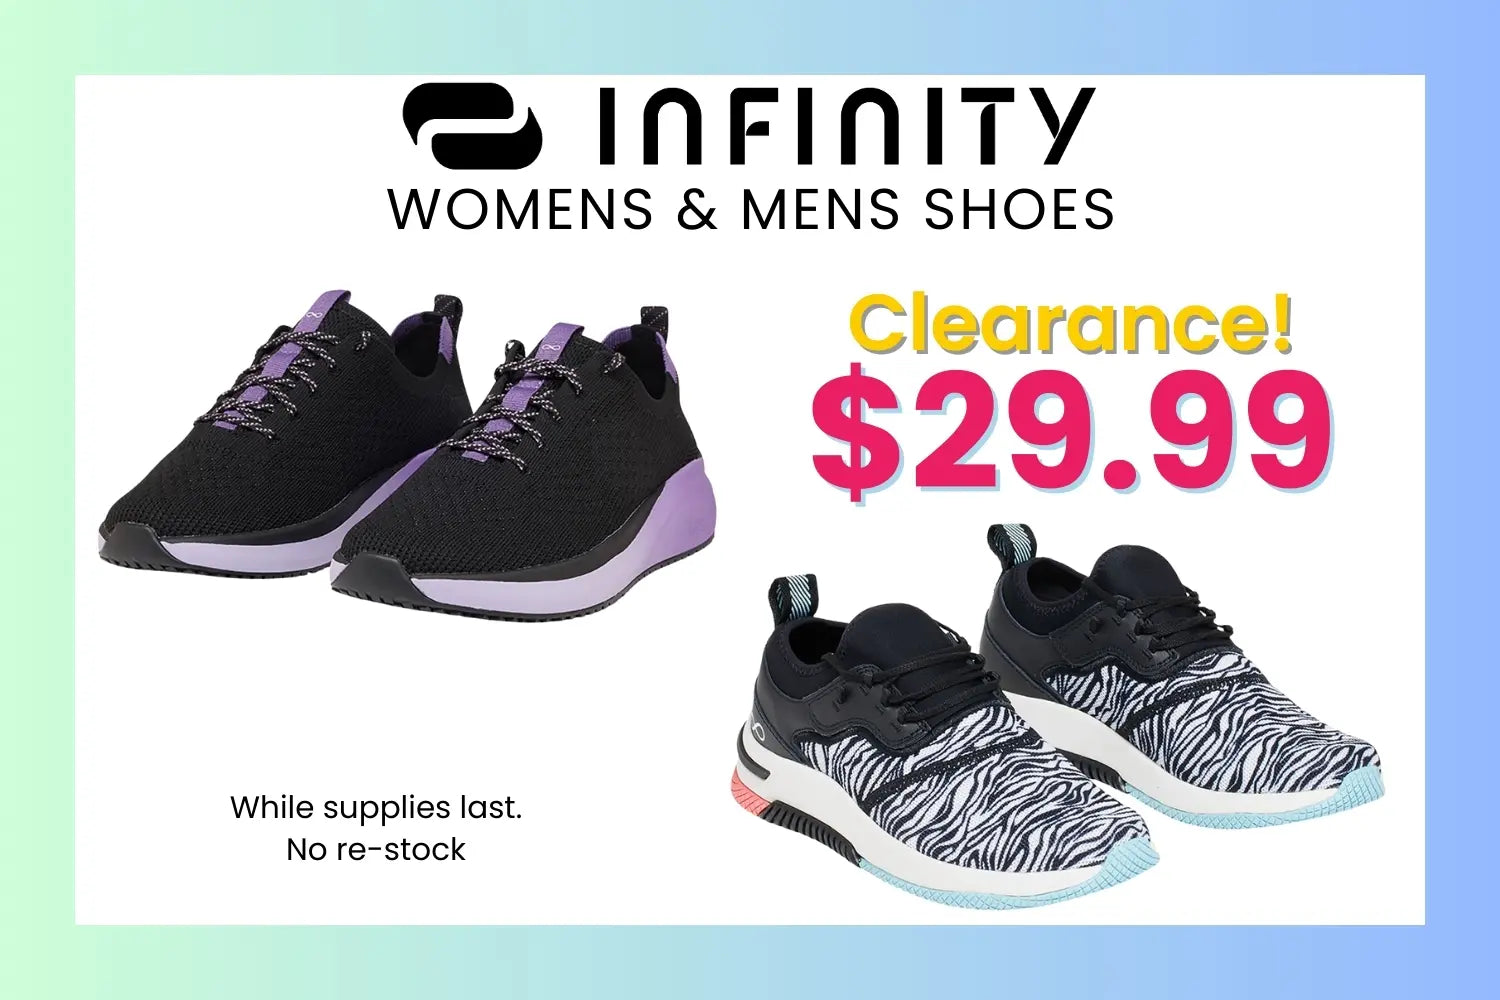 Two pairs of Infinity Medical Nursing Shoes on a white background featuring text that states Infinity Women's and Men's Work Shoes are on sale for $29.99 while supplies last.